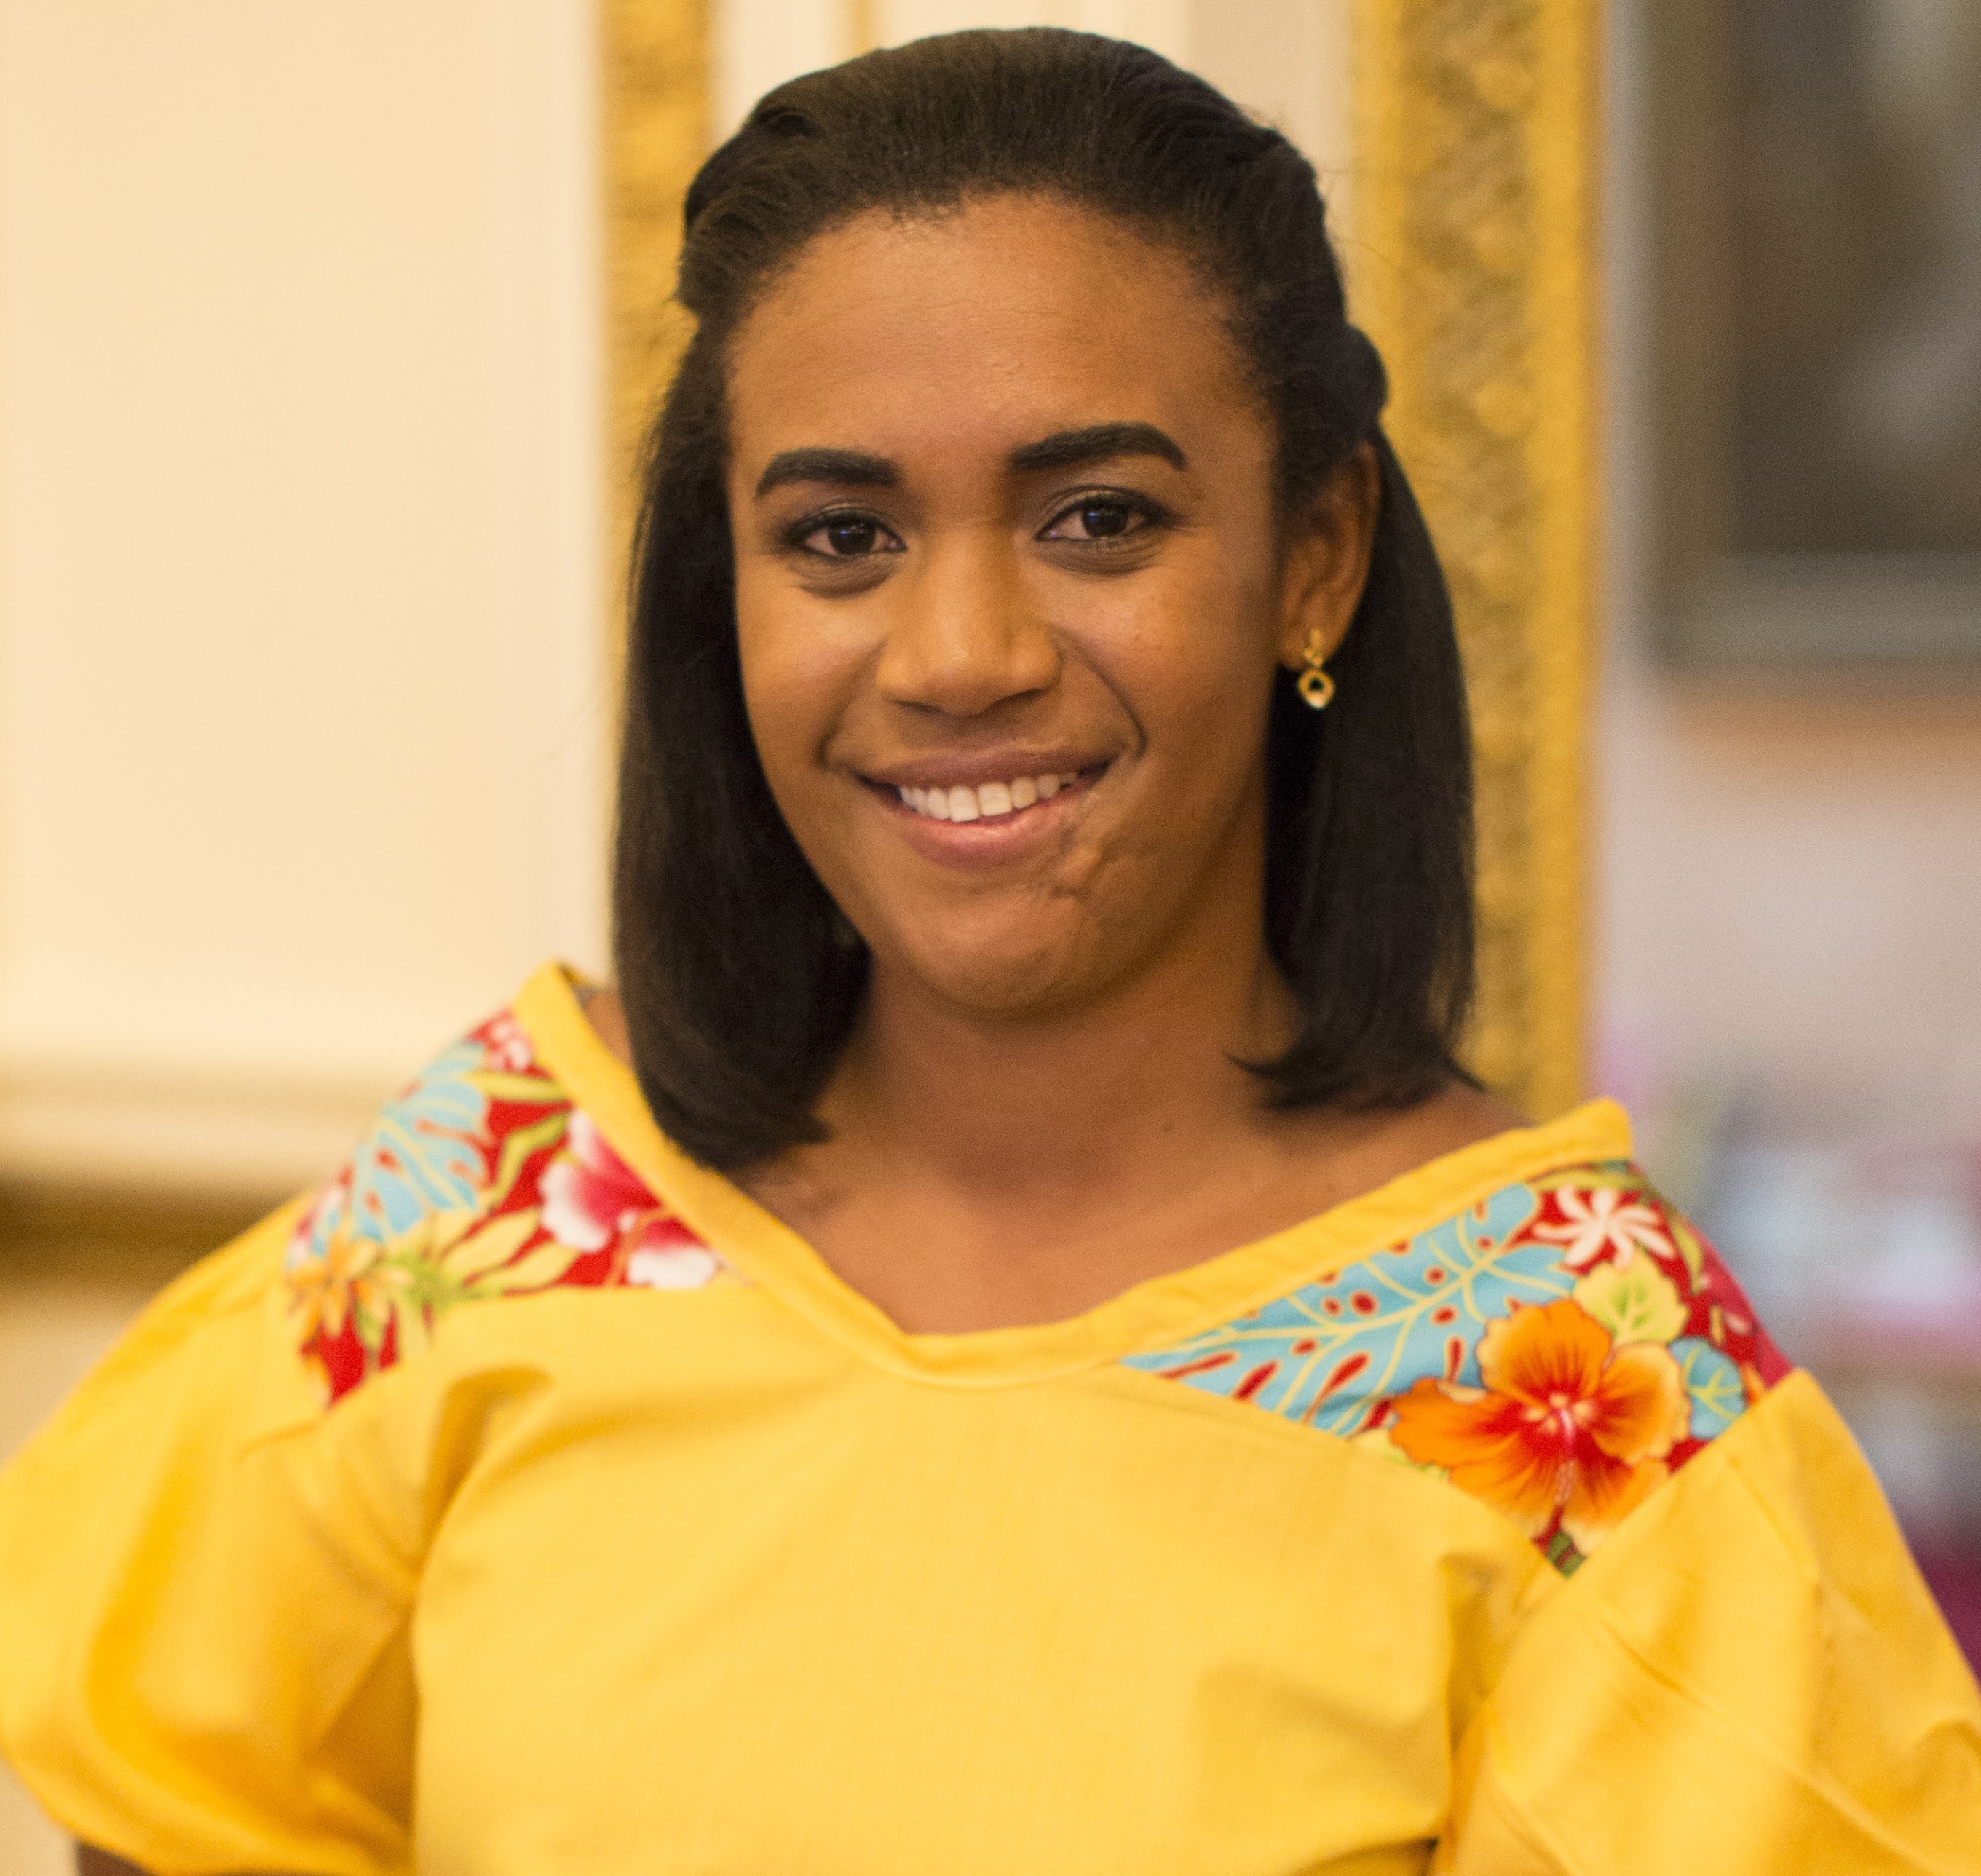 Deidra Smith 2016 Queen's Young Leader from Belize